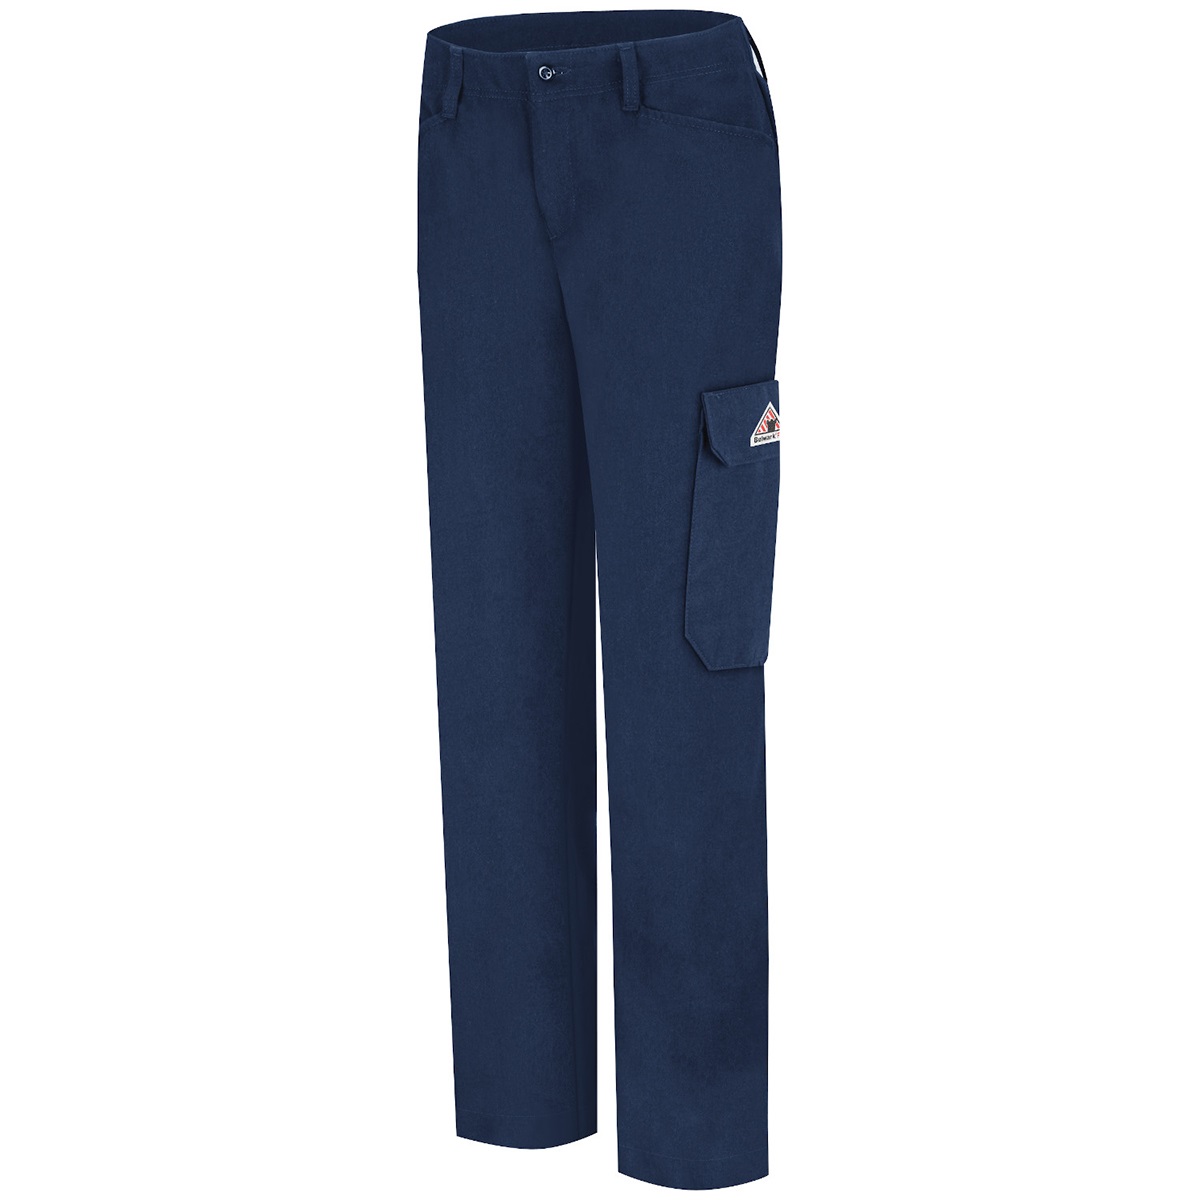 Women's Cool Touch Cargo Pocket Pants in Navy